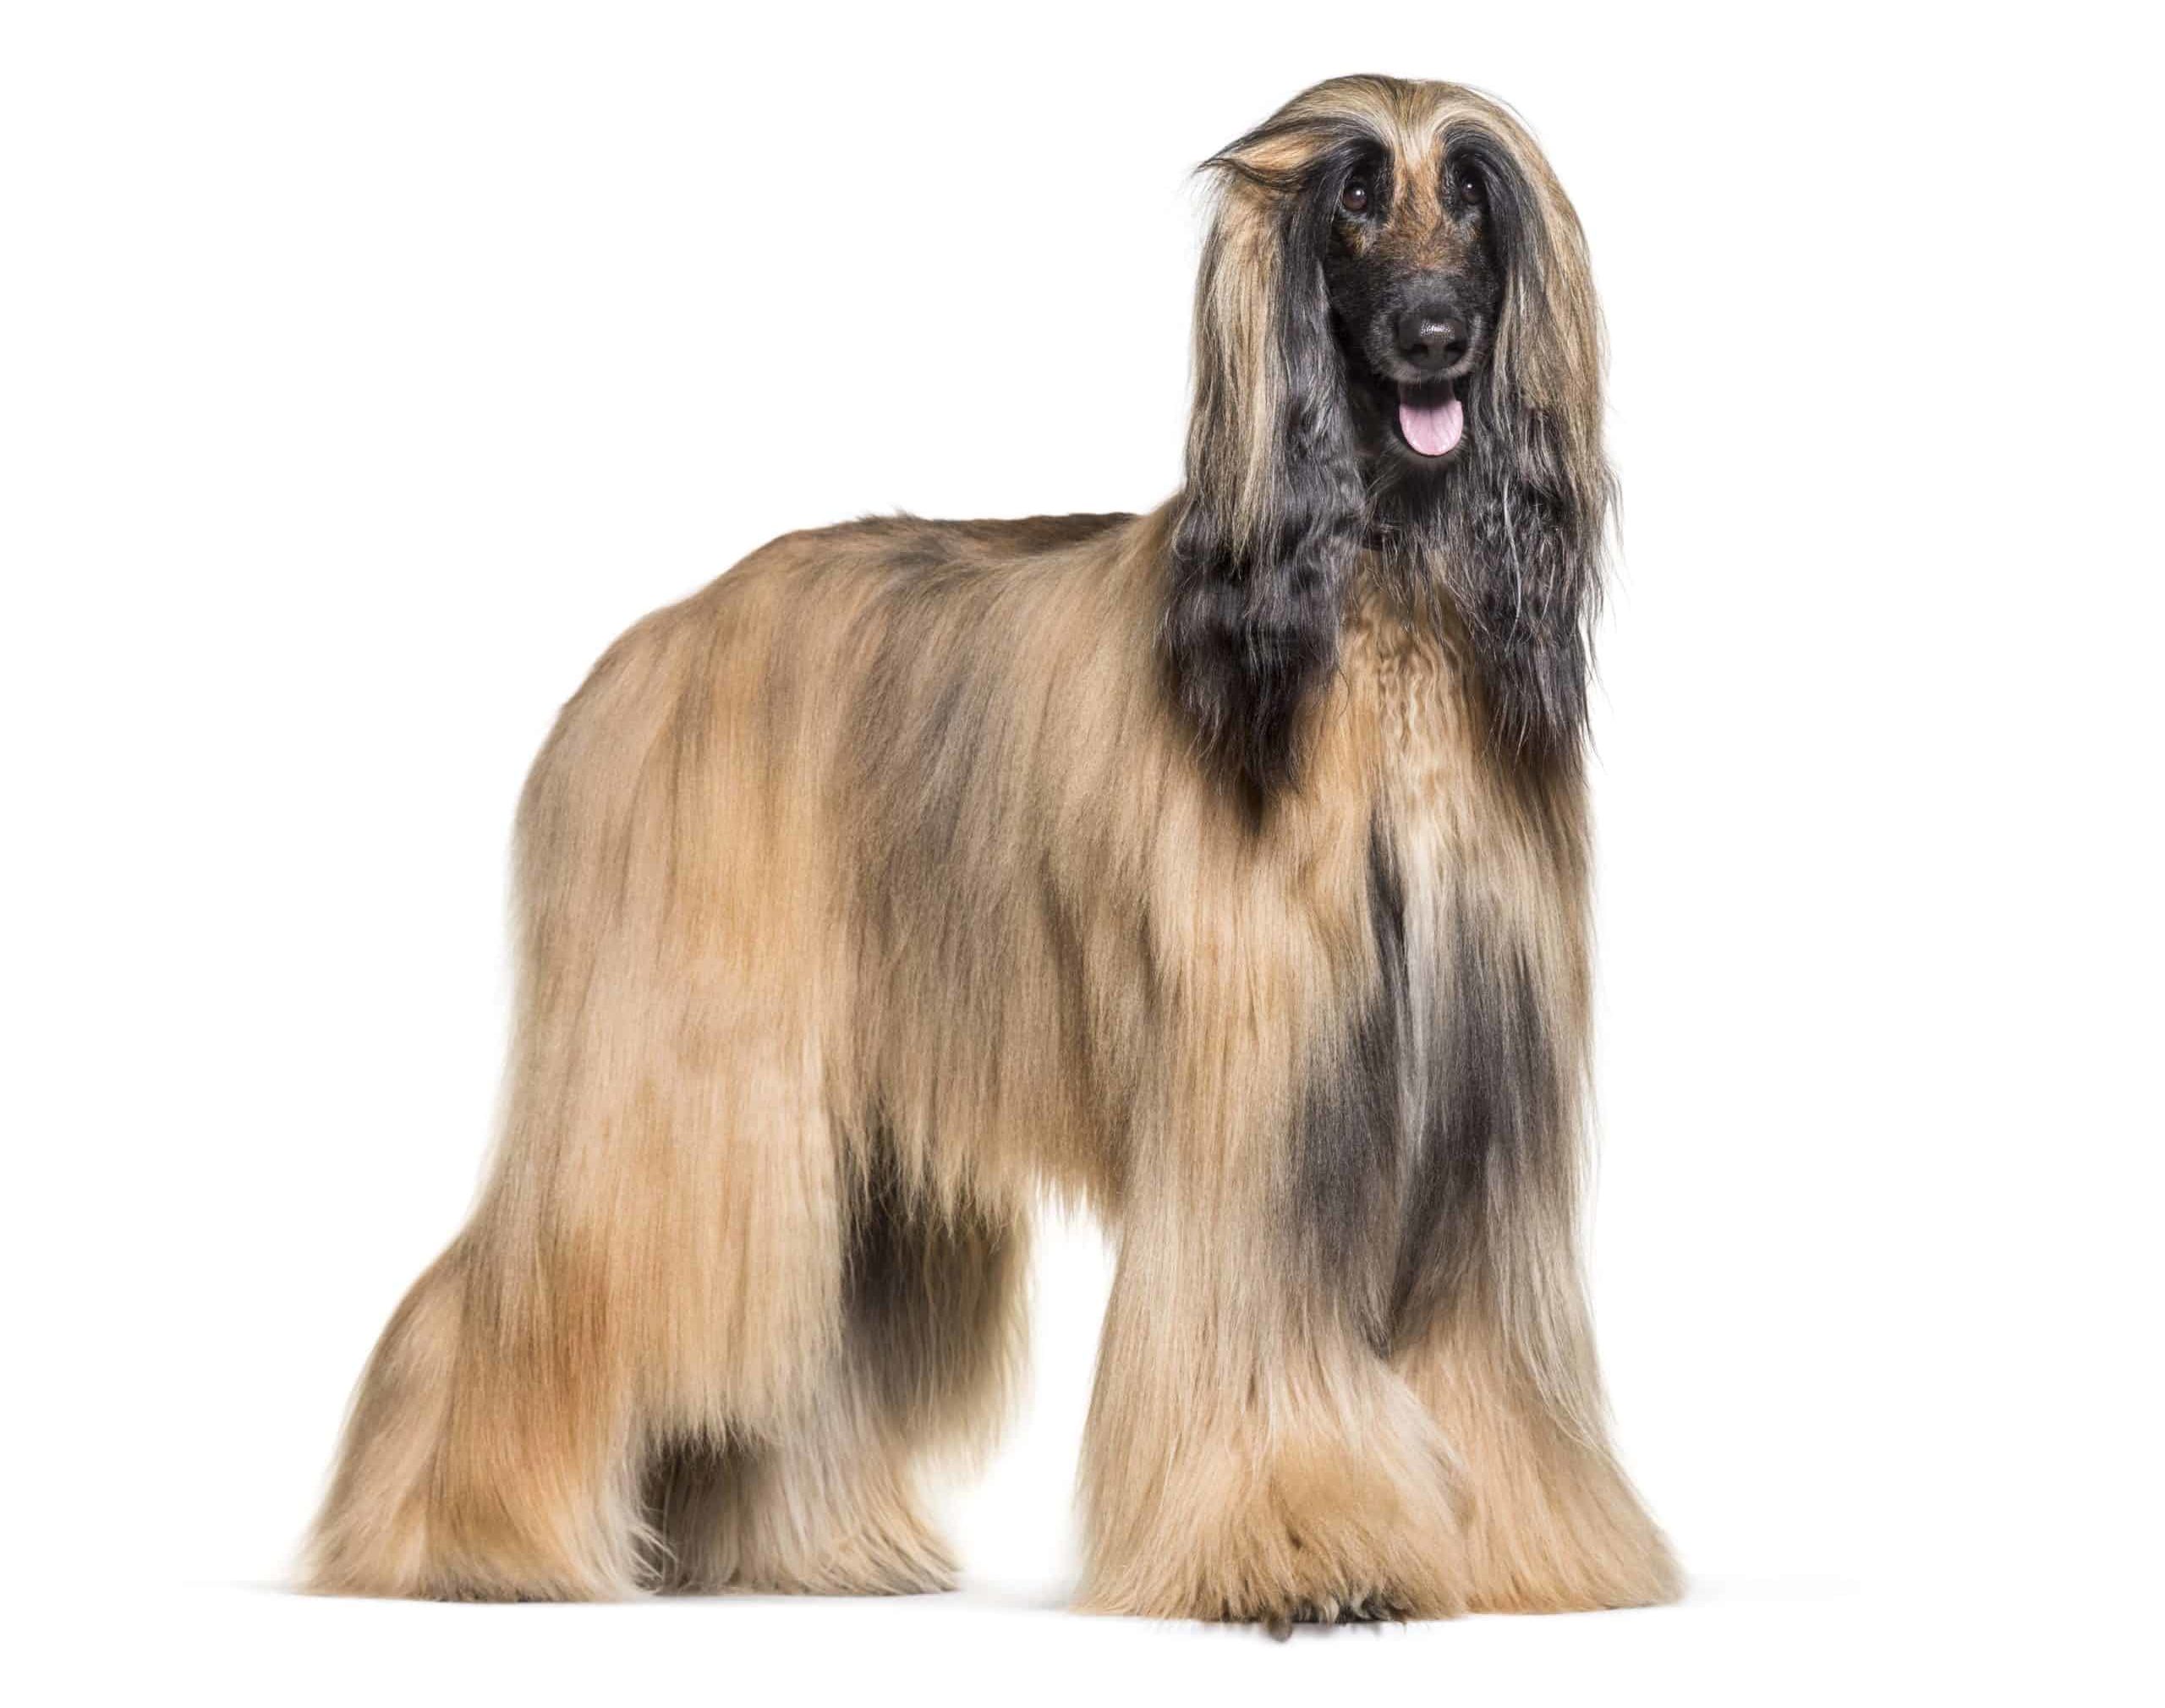 Afghan Hound: Known for its long coat, graceful gait, confidence